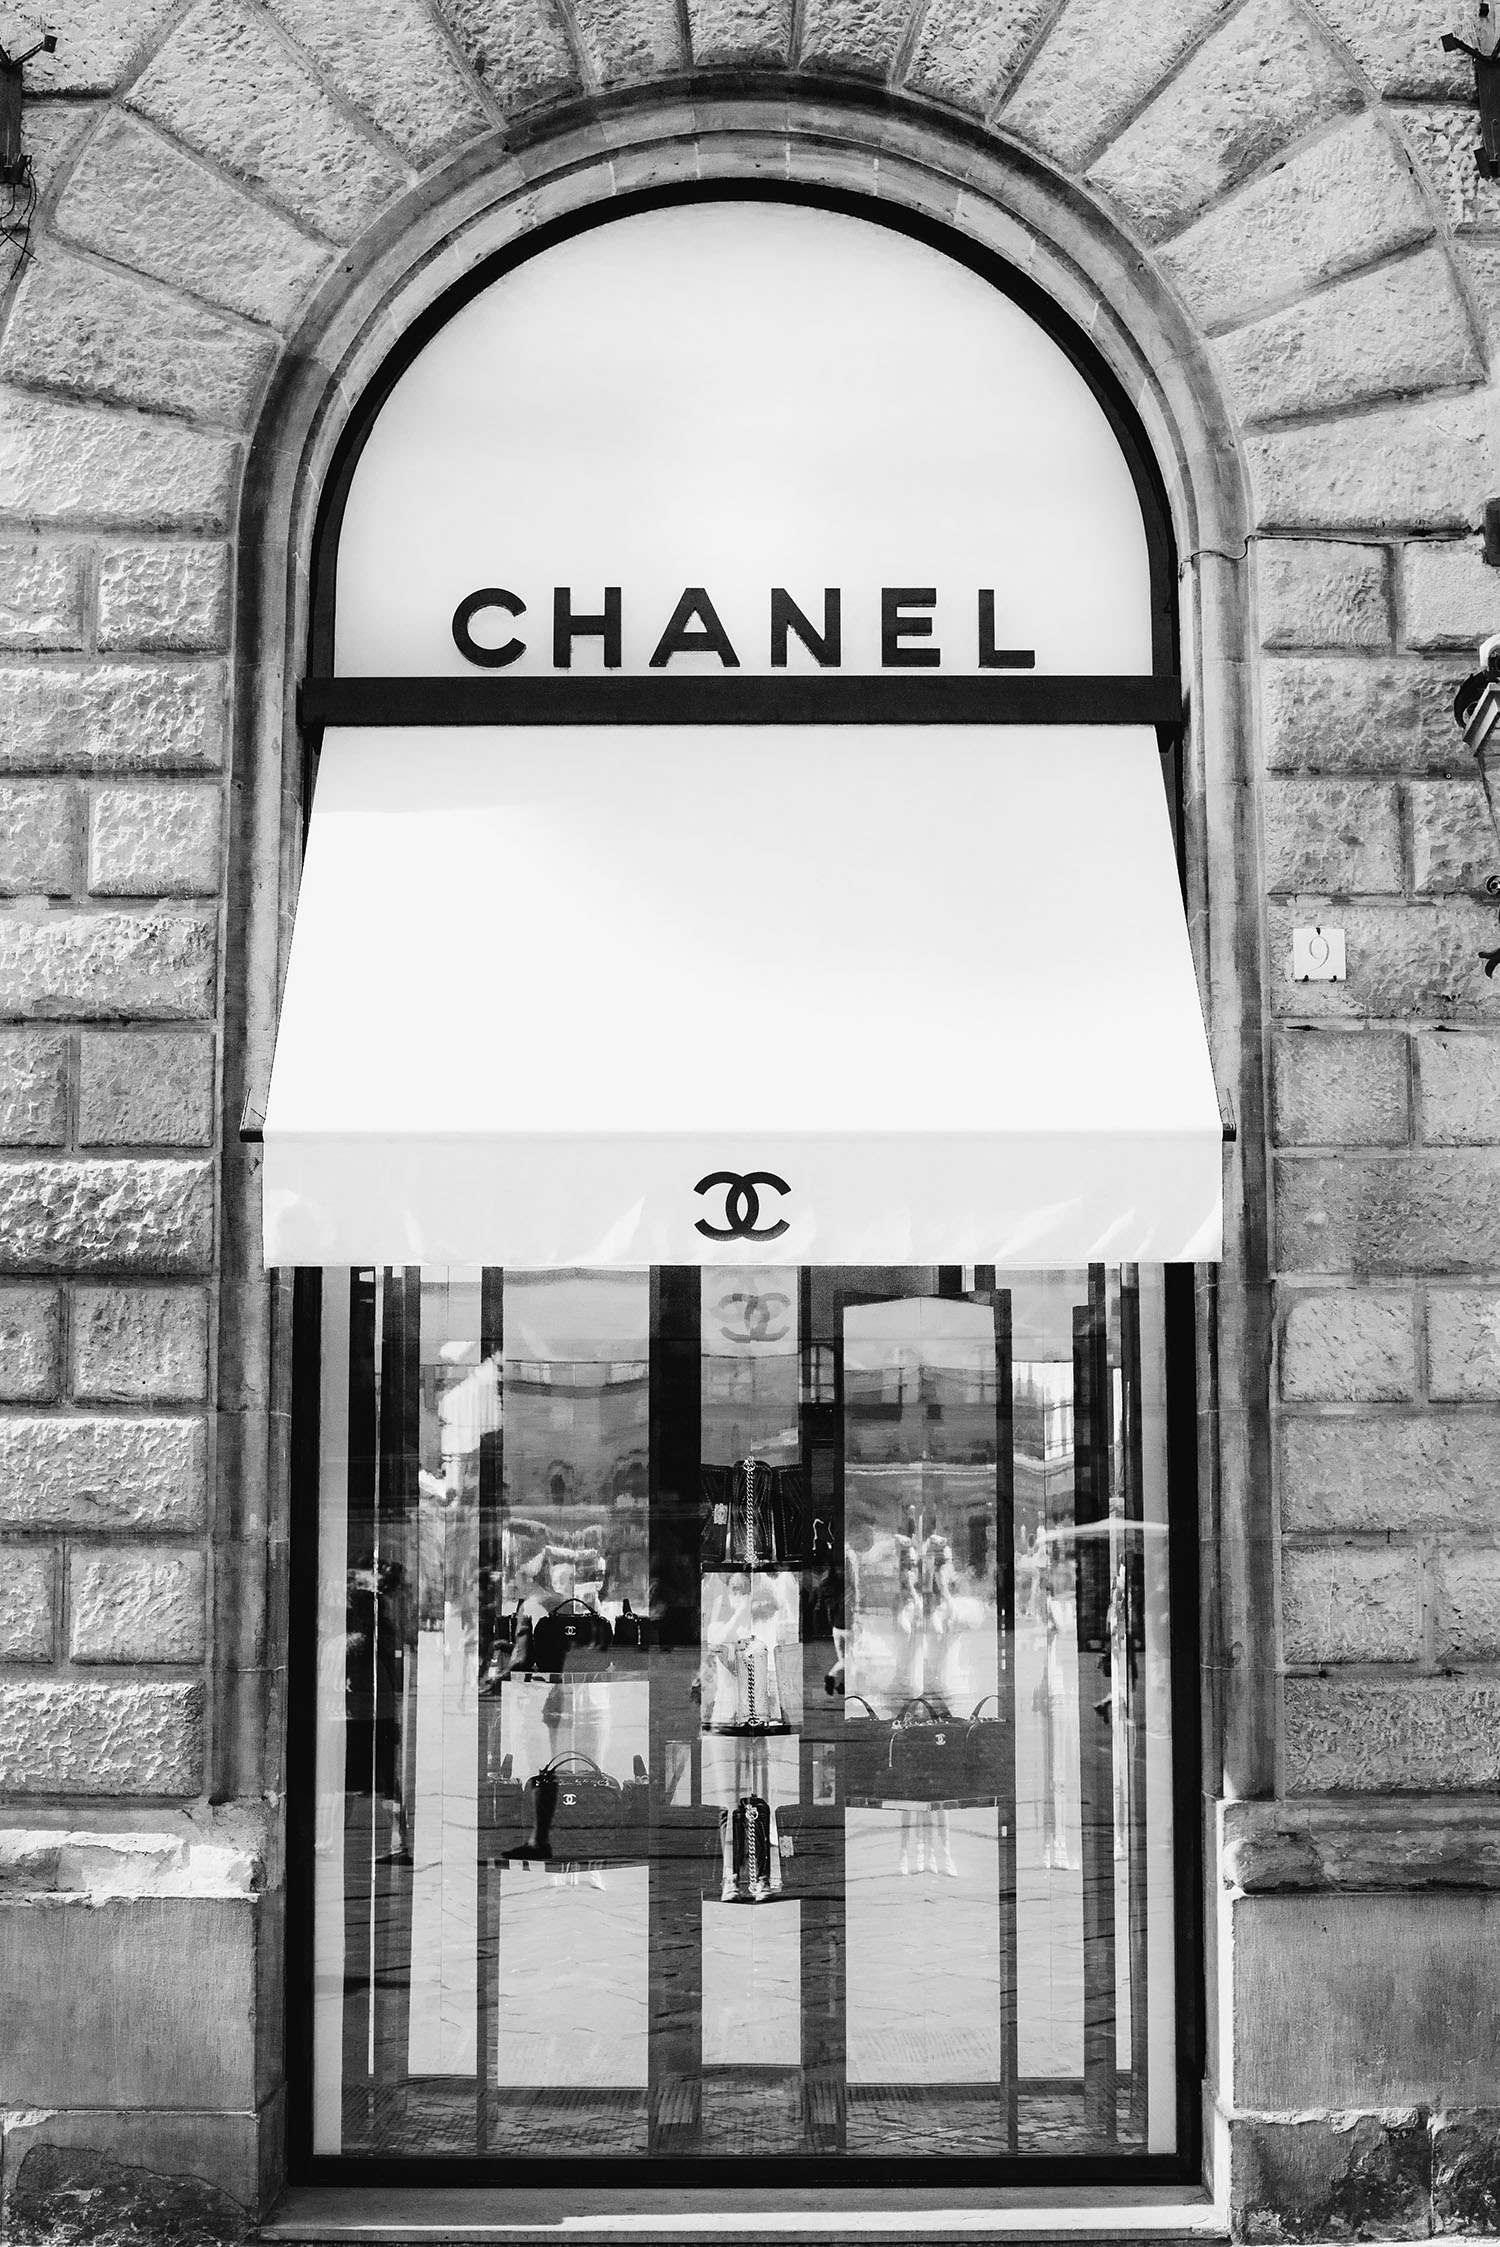 The Chanel store in Florence, Italy, as captured by top travel blogger Cee Fardoe of Coco & Vera